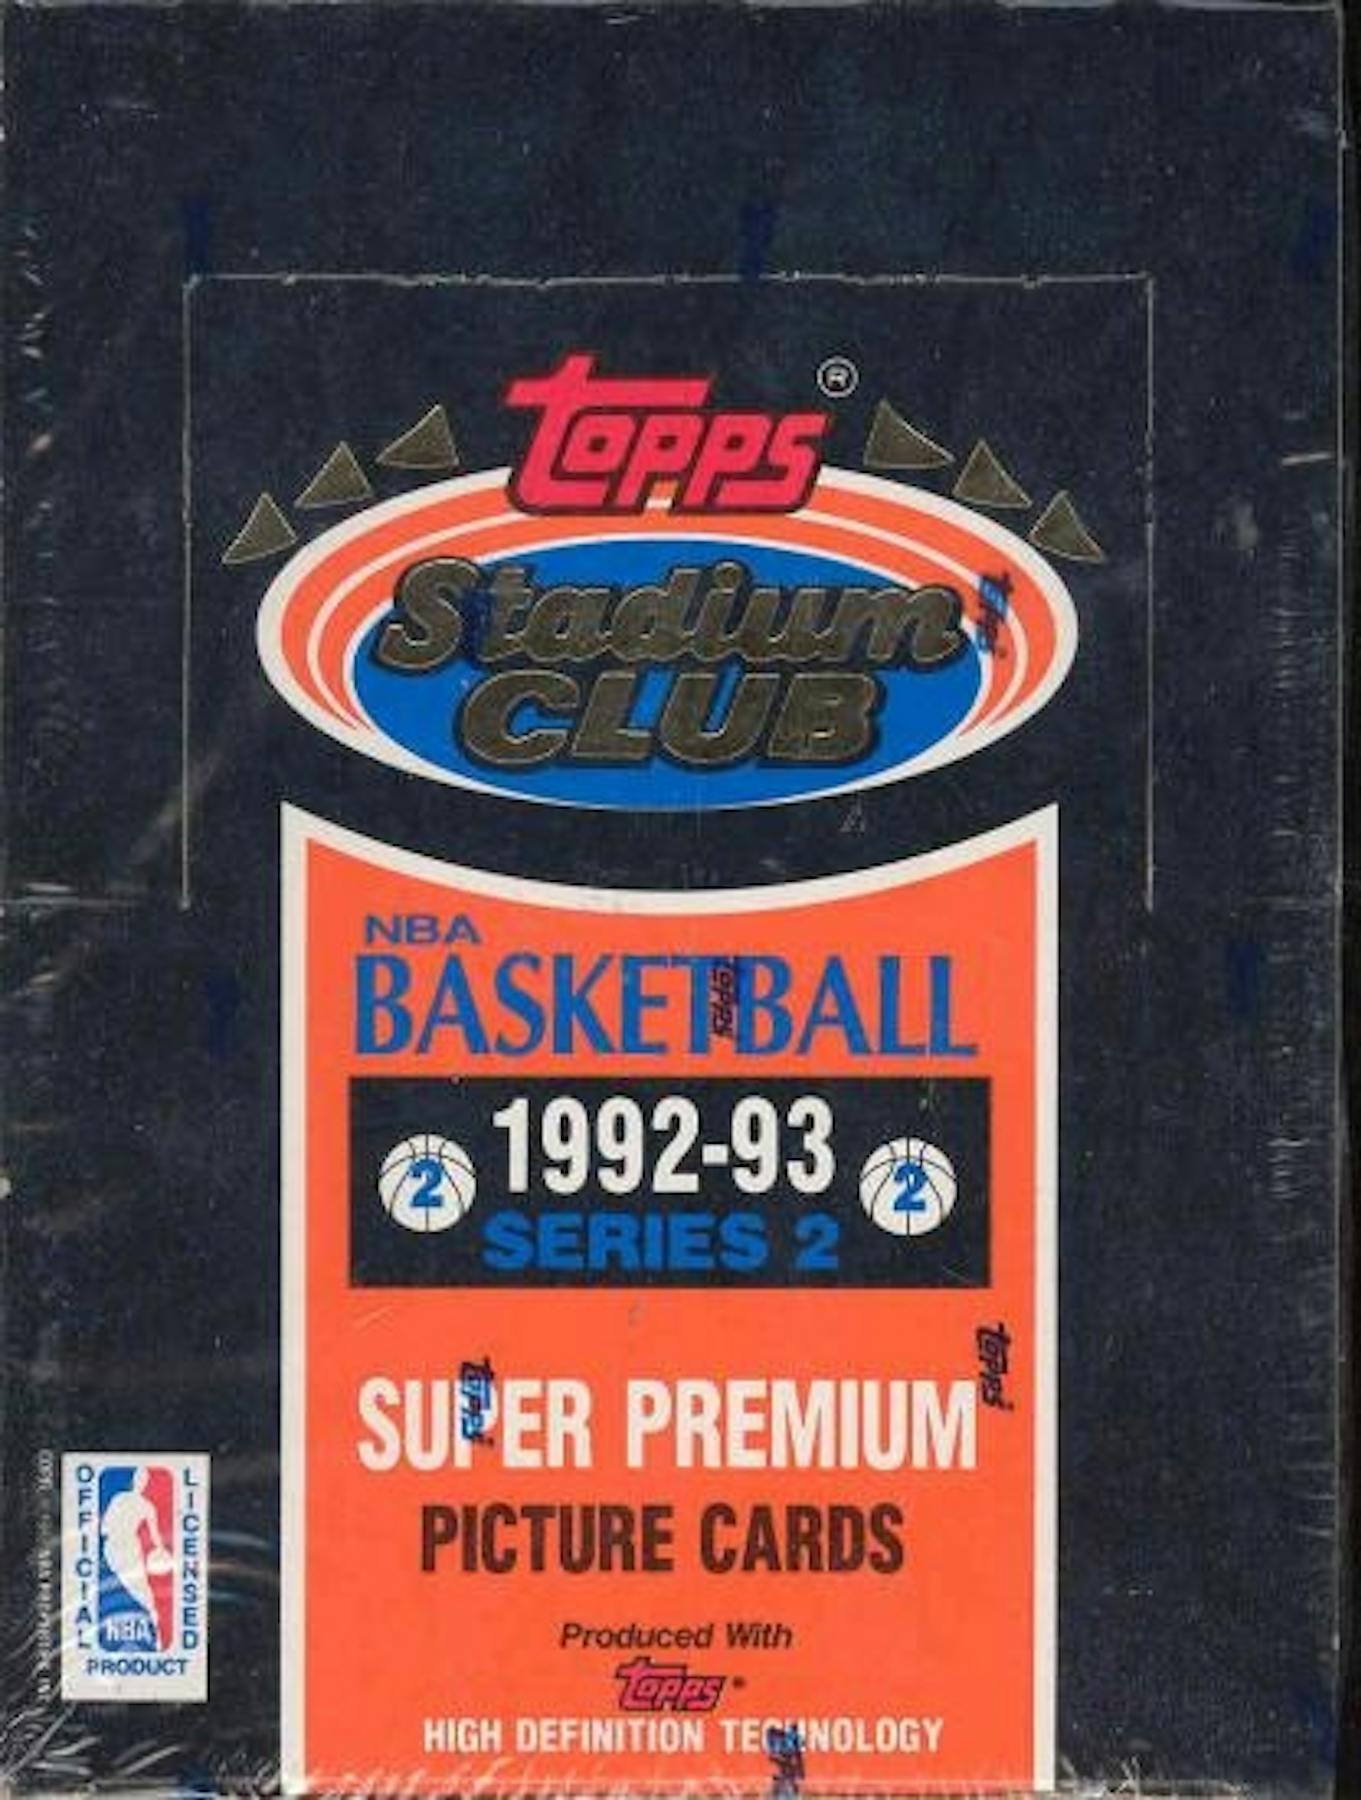 Topps 1992-93 Basketball Set Got Company Back in the Game